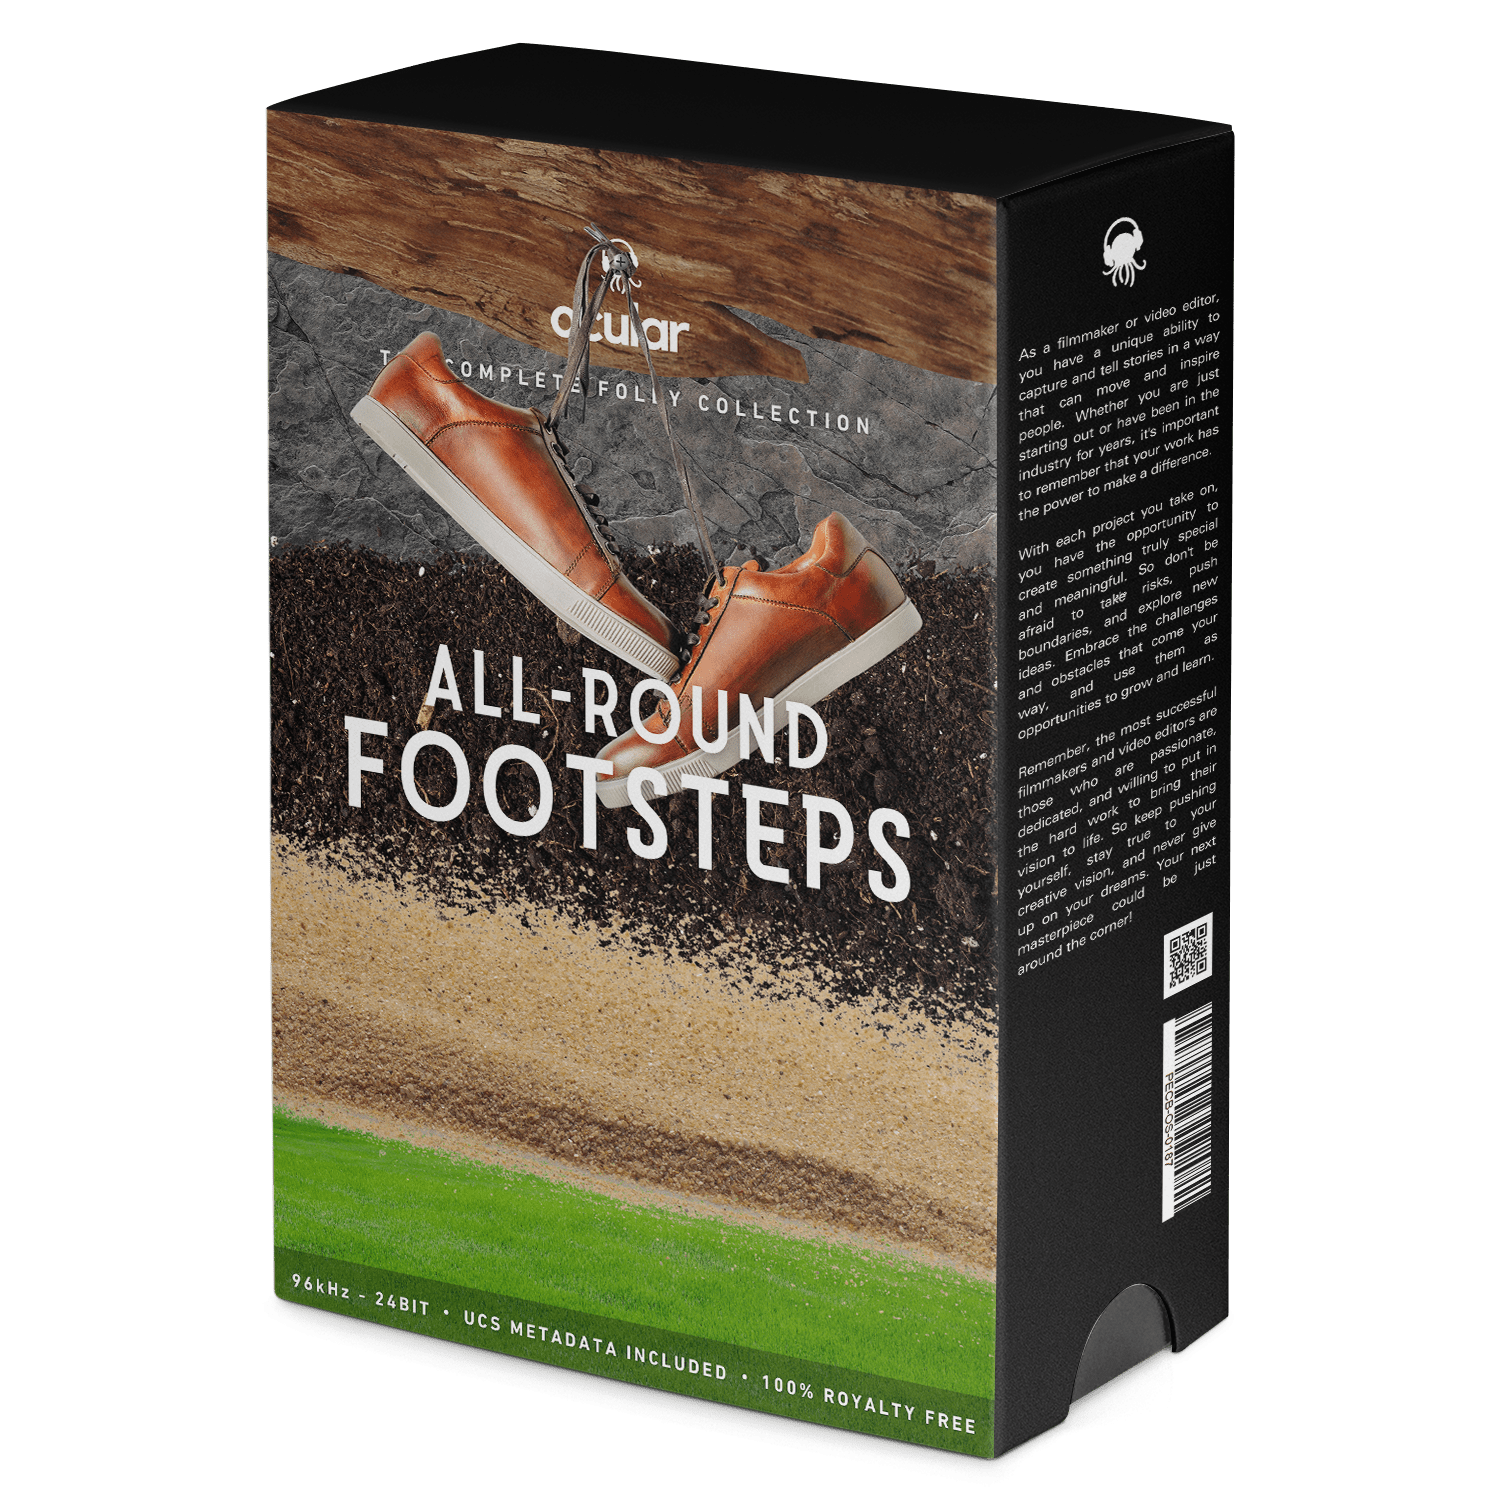 All-Round Footsteps Sound Effects for Video Editing. Professional Sound FX Library.